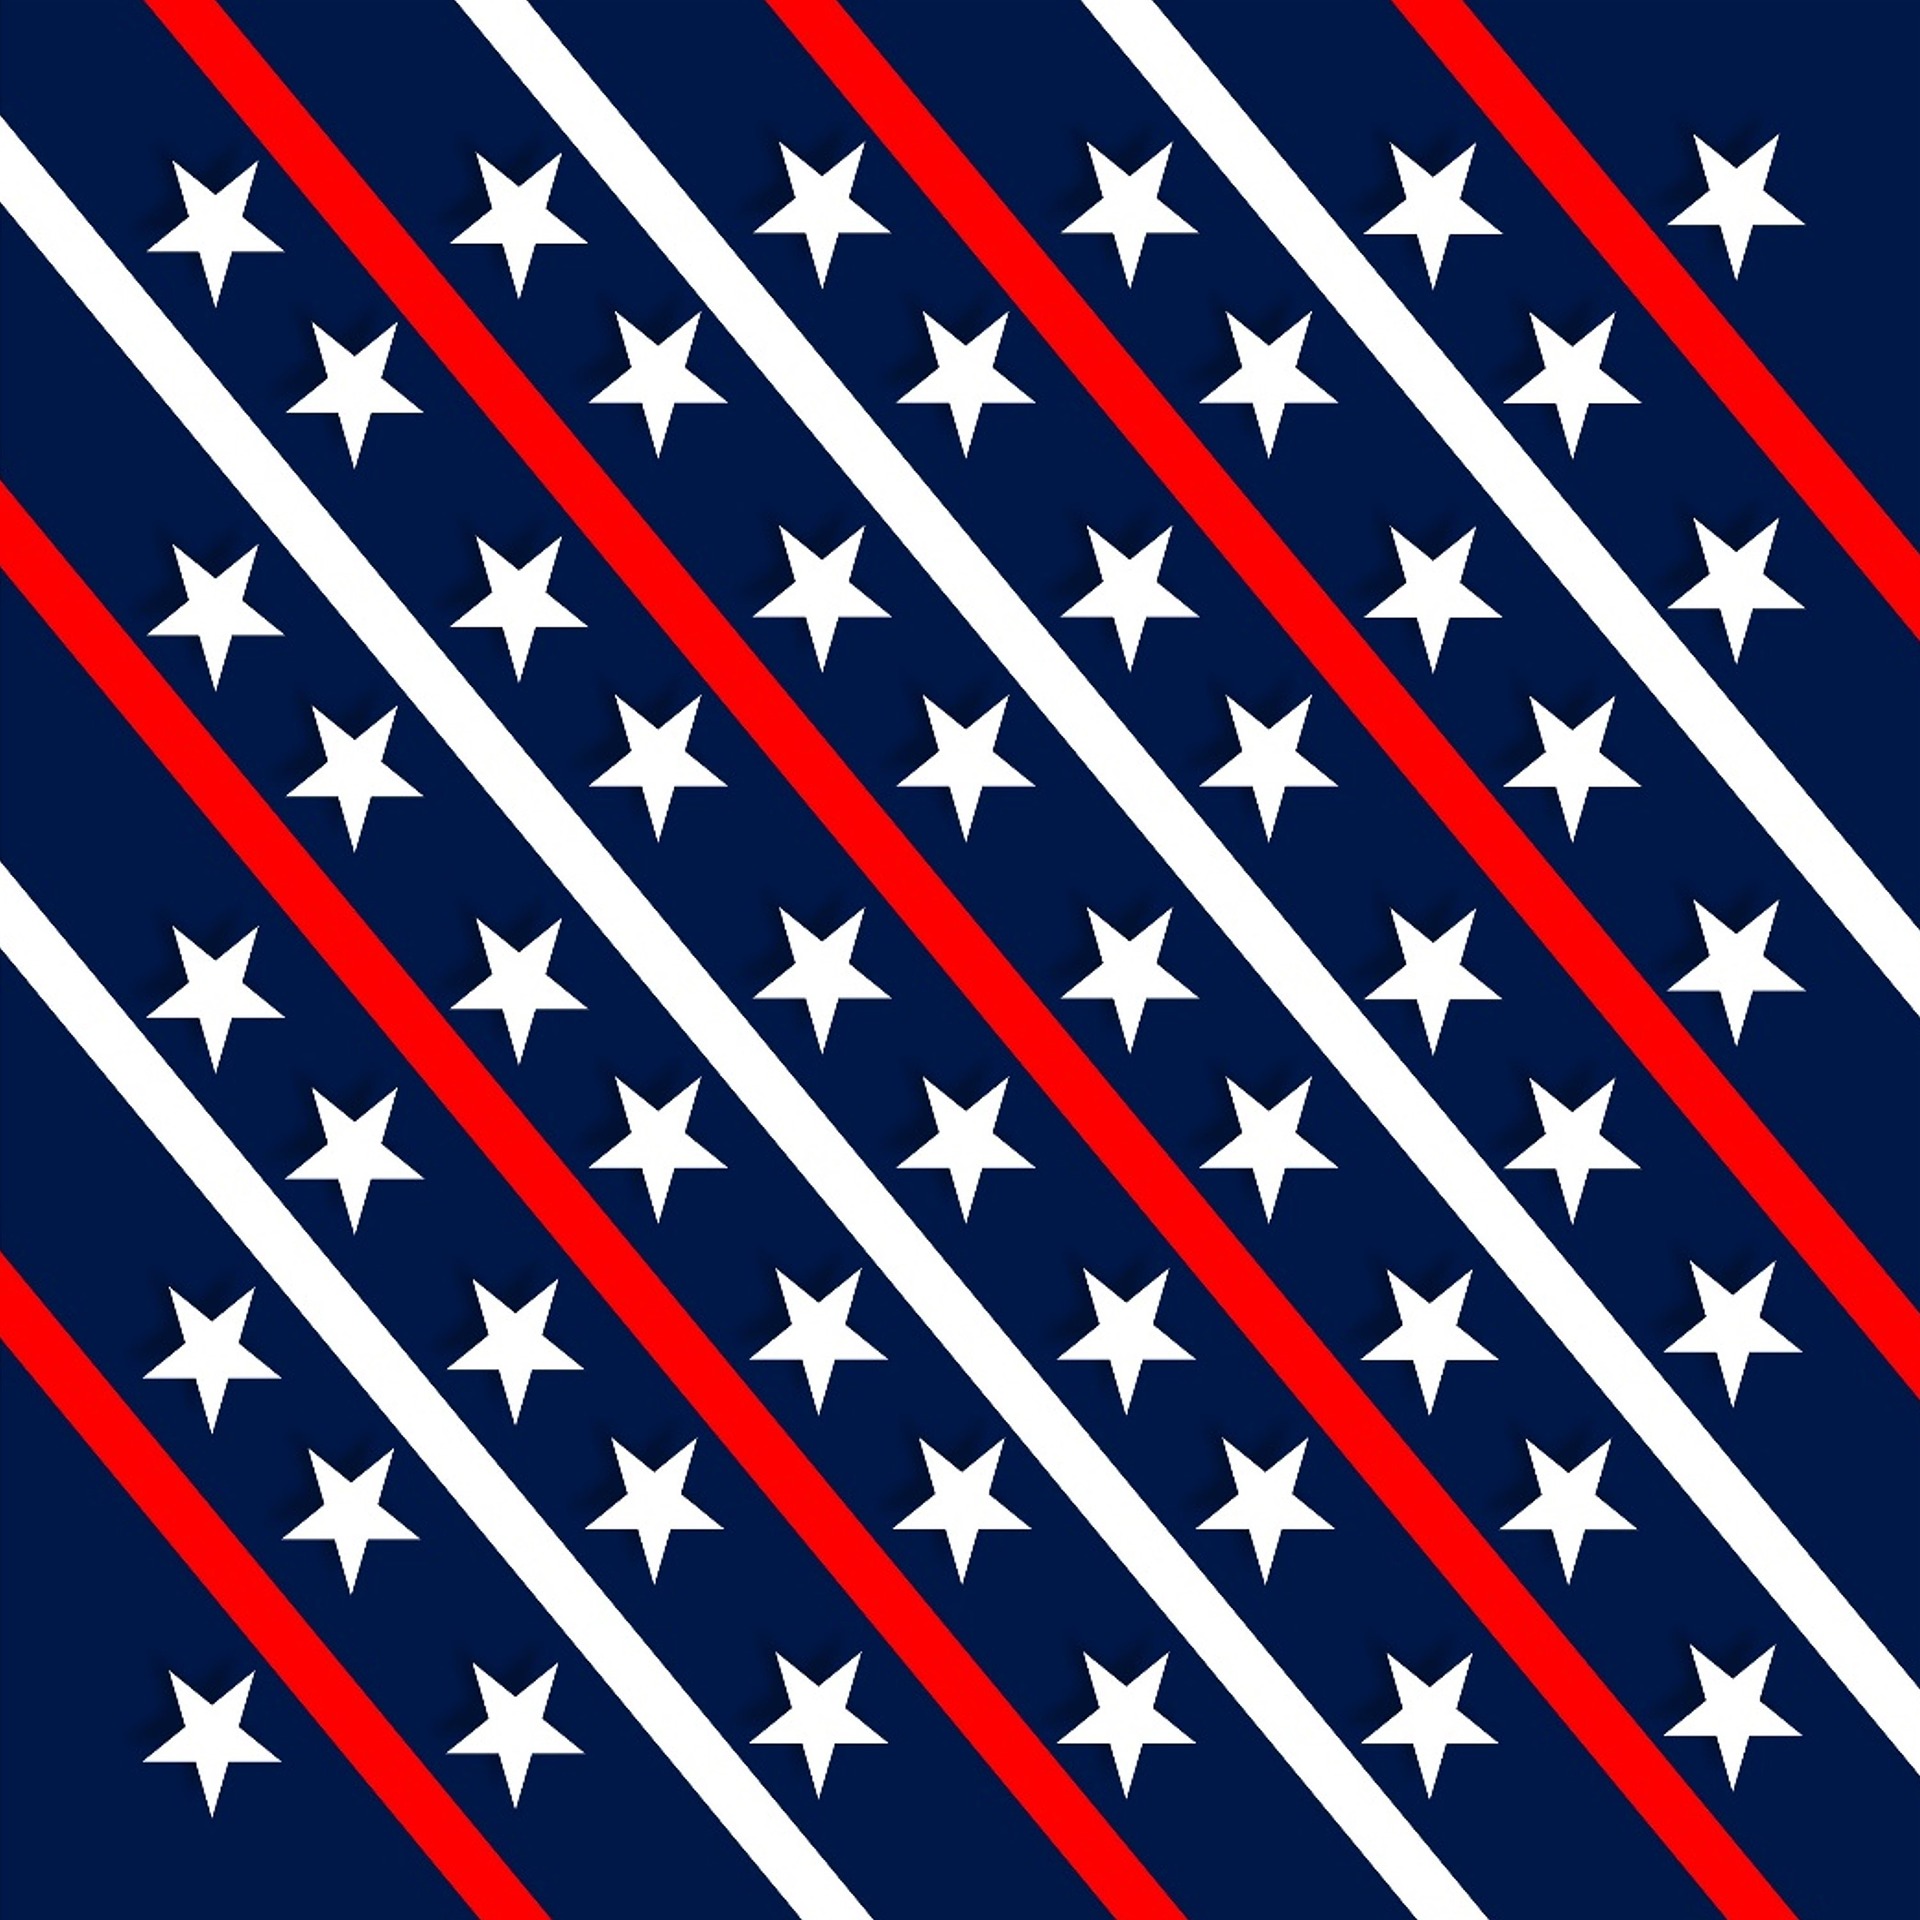 white stars, red and white diagonal stripes on a navy blue background.